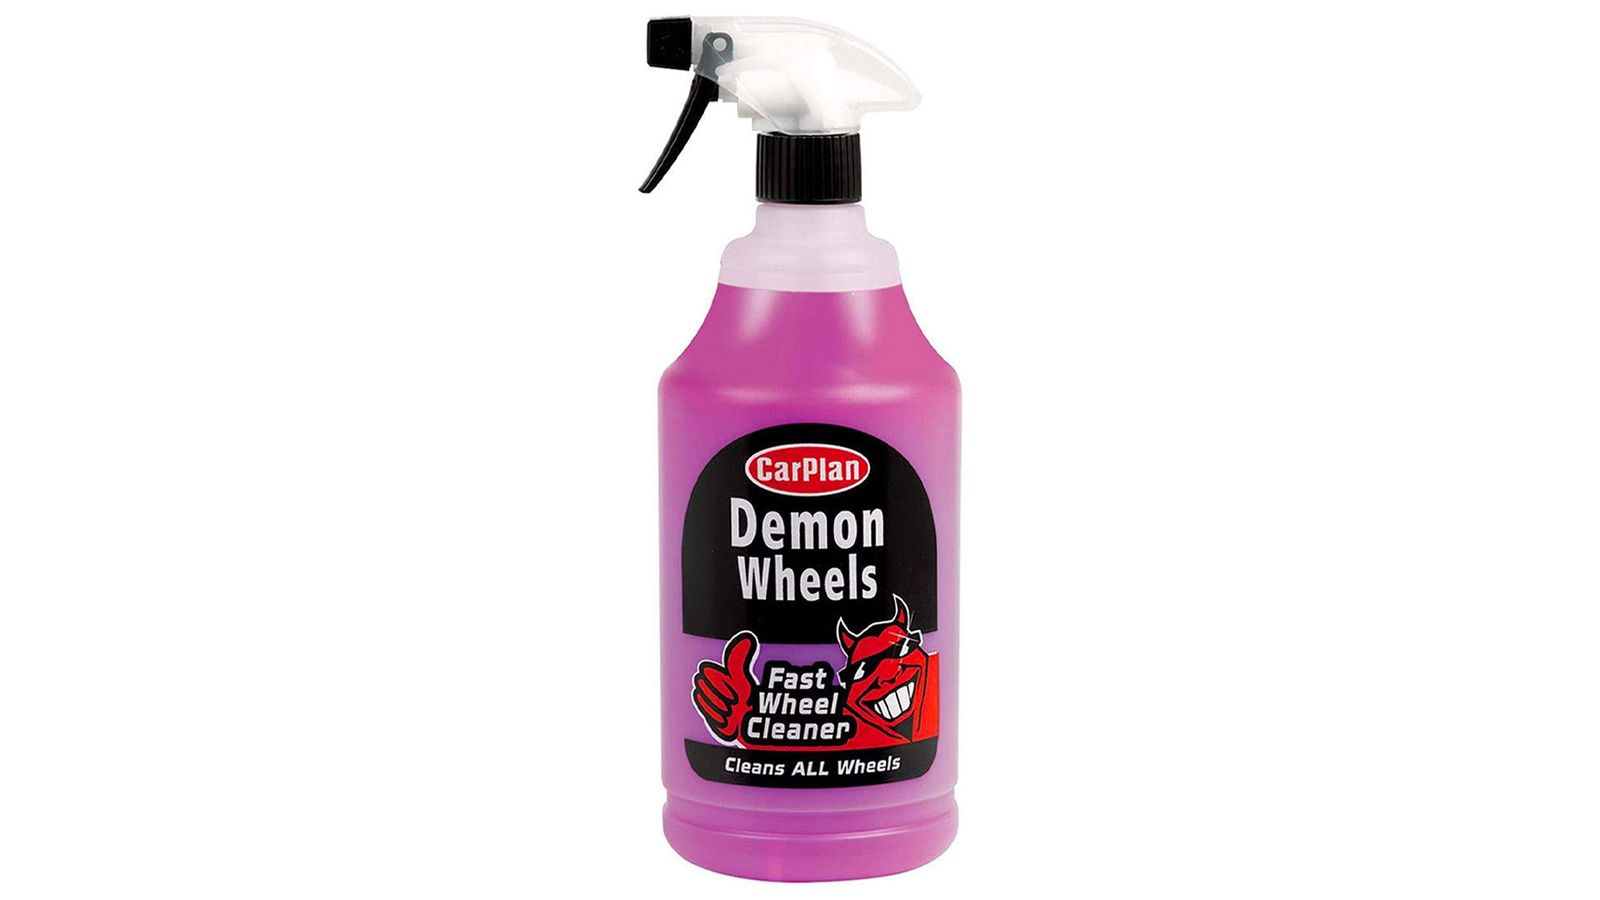 CarPlan Demon Wheels product image of a clear spray bottle containing a pink cleaning product, plus black and red labels.